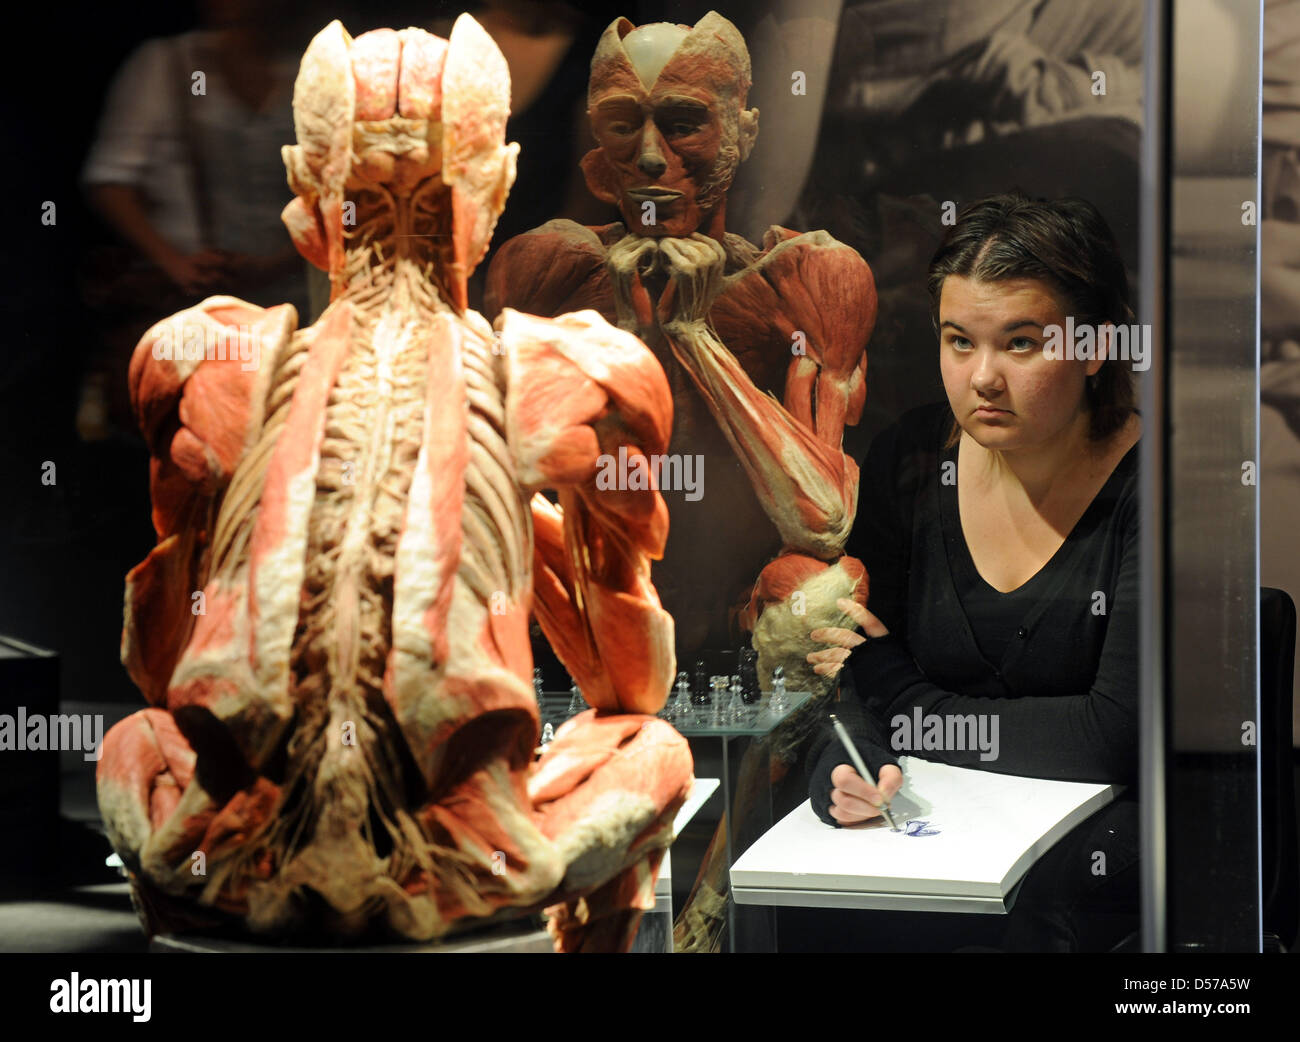 Katharina Kuepker makes a sketch of a preserved chess player in the exhibition 'Body Worlds' ('Koerperwelten') in Bremen, Germany, 29 April 2010. It seems as if the player's reflexion sits next to her. During 'Sketch Night', artists have the opportunity to 'use' the exhibits as inspiration for works of art. The exhibition 'Body Worlds' is open in Bremen until 25 May 2010. Photo: In Stock Photo